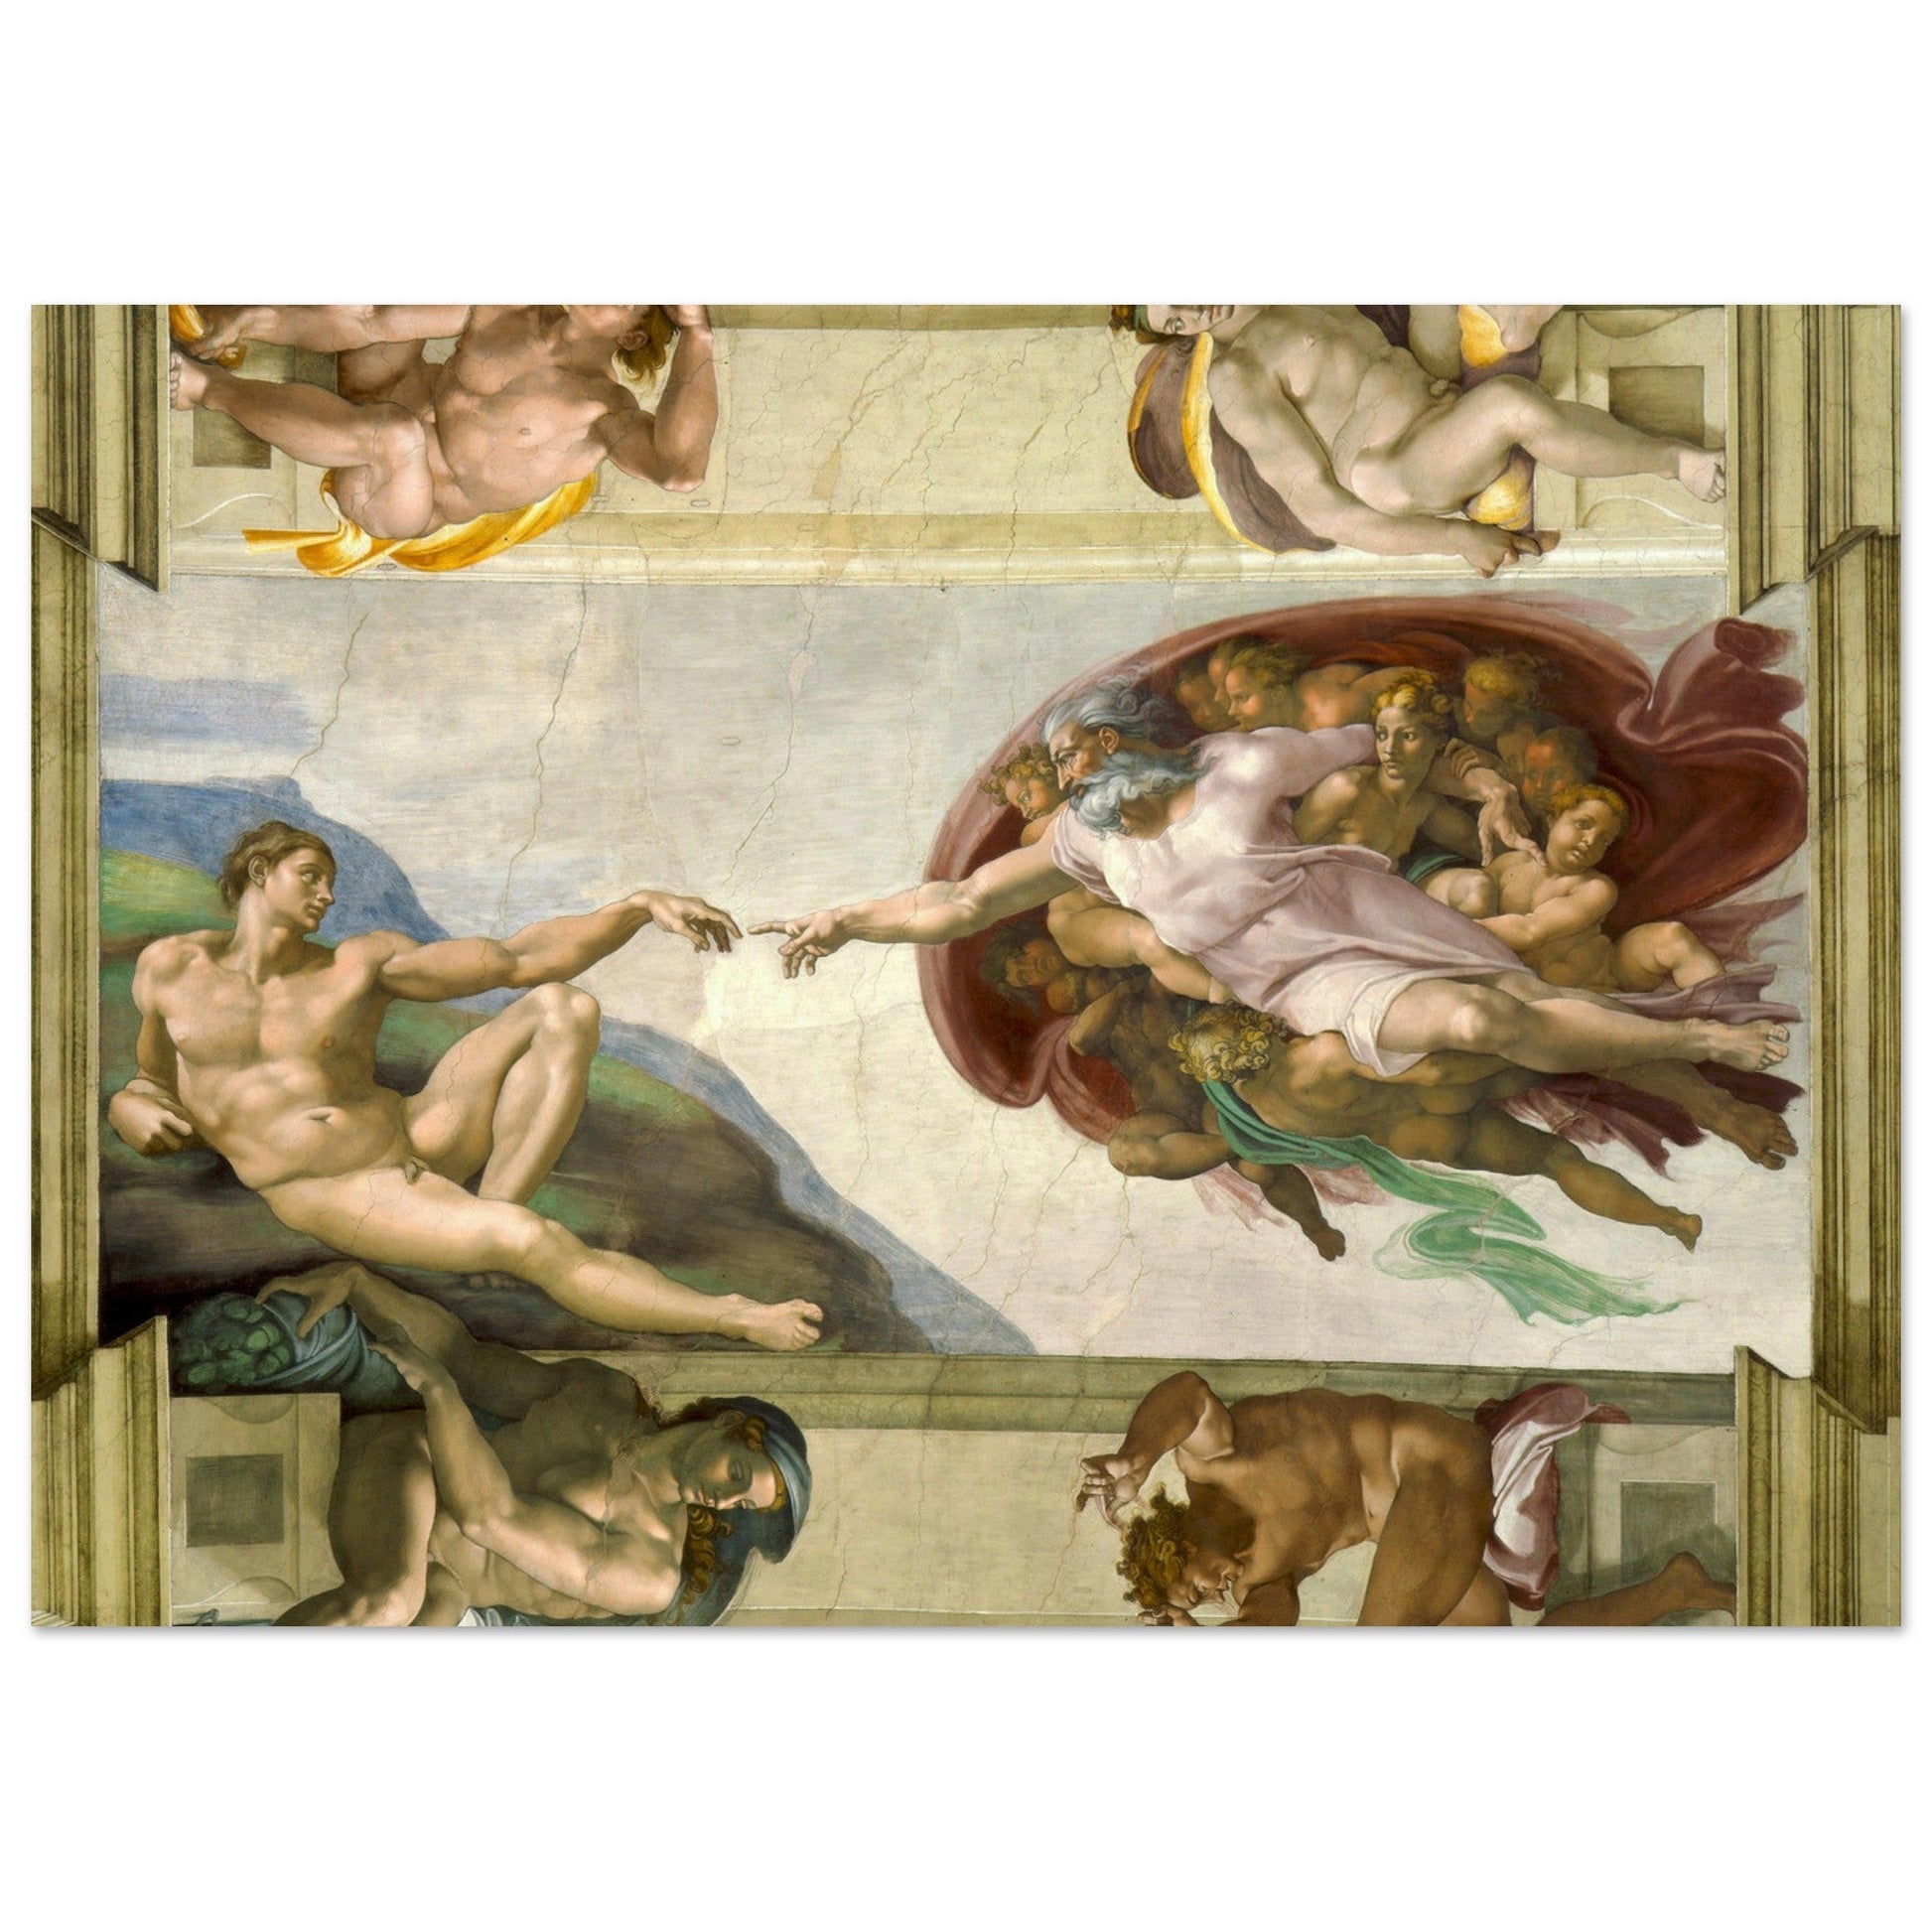 Sistine Chapel - Creation of Adam, High Quality Posters.